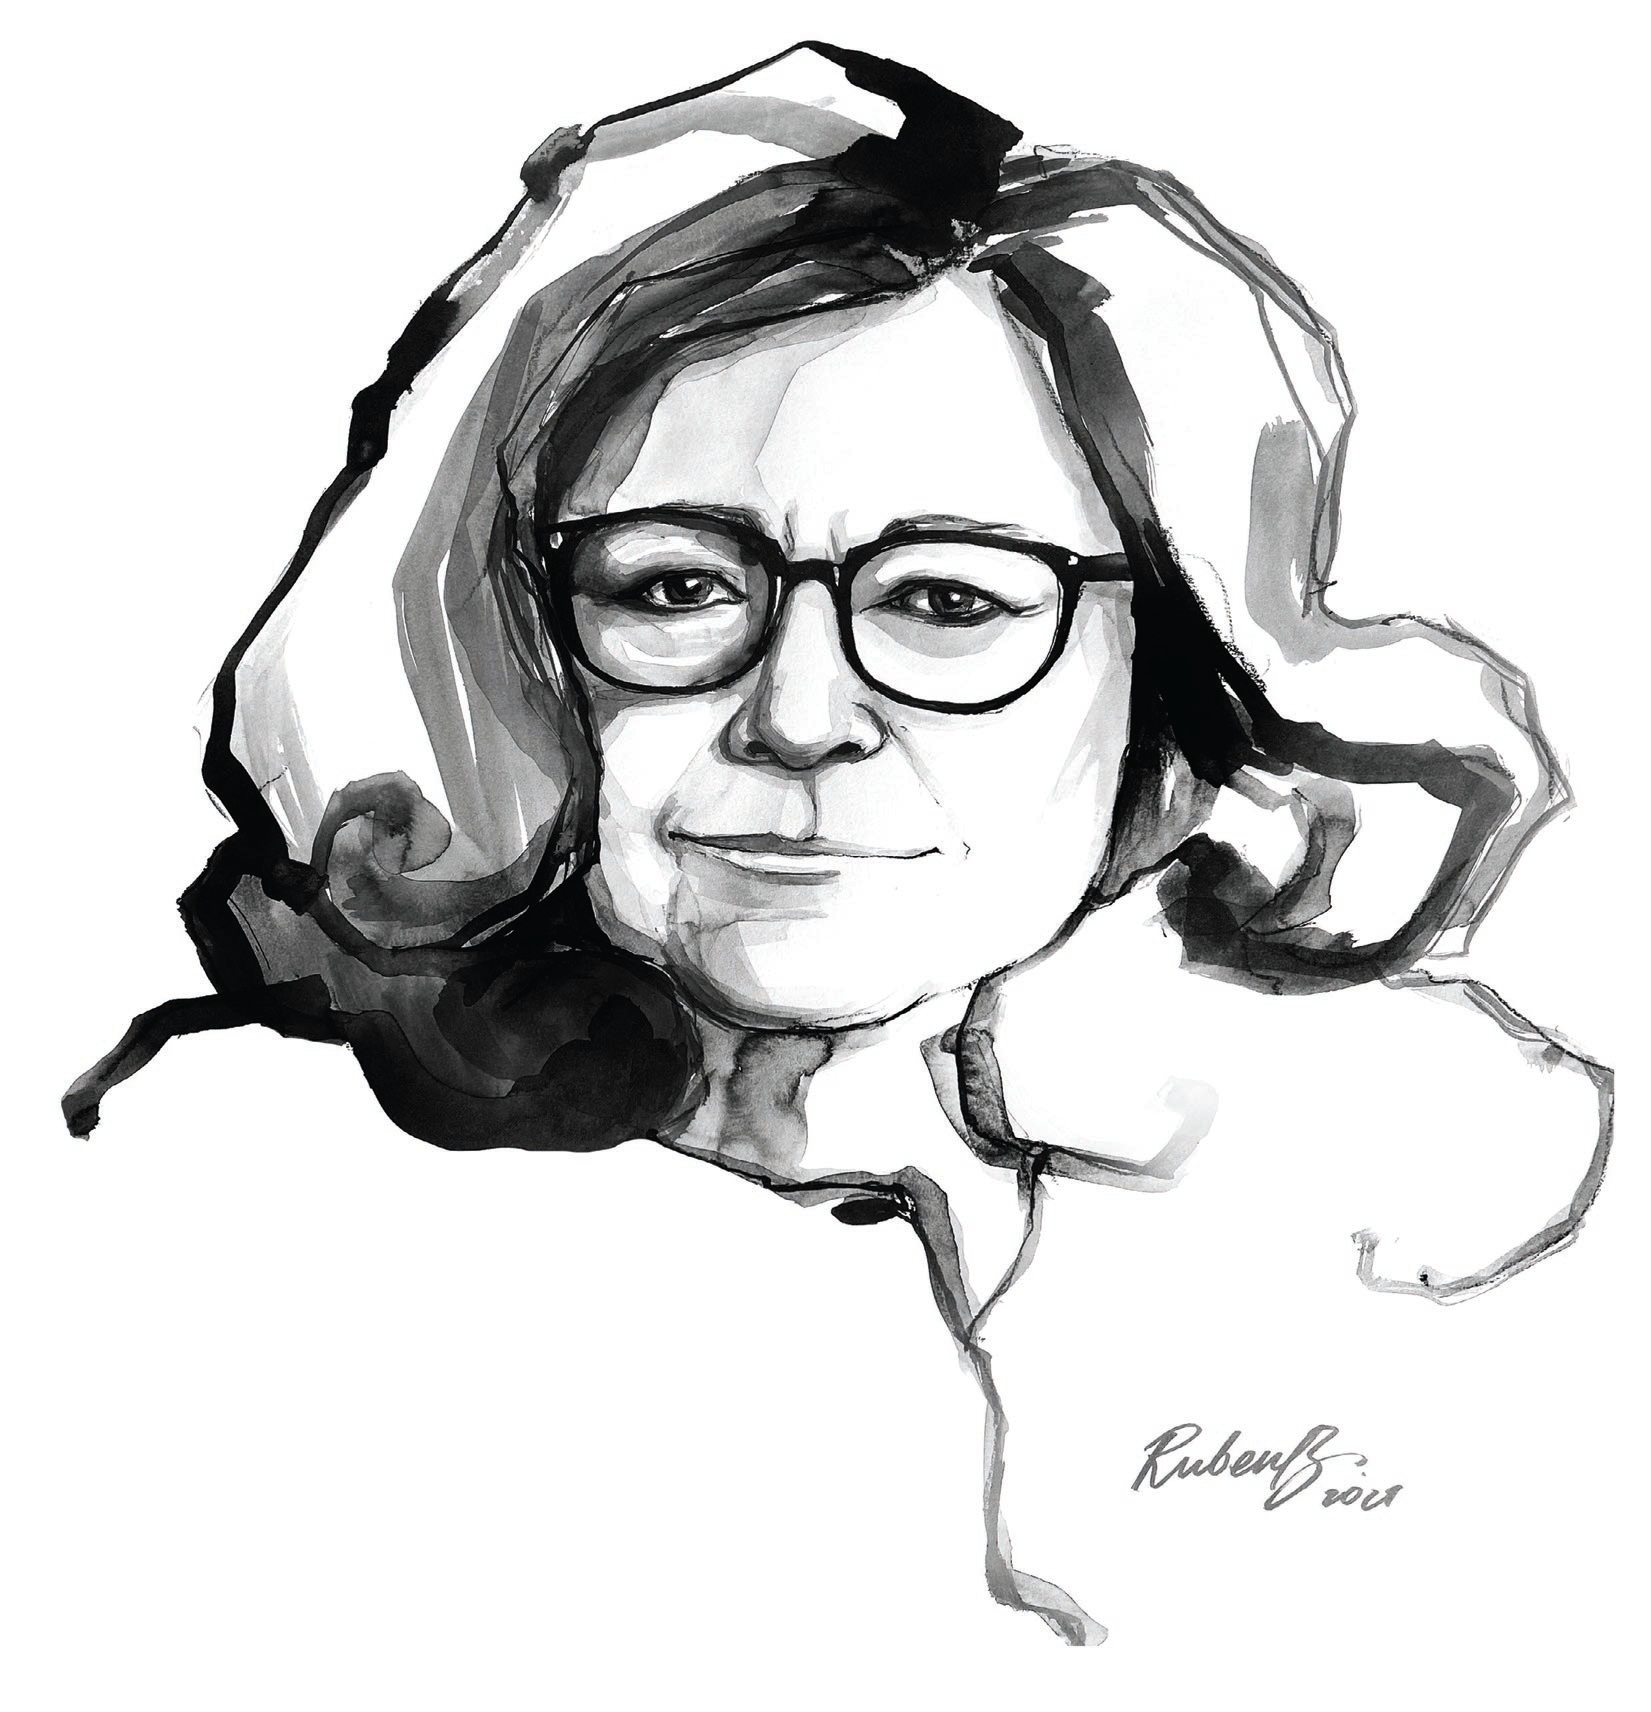 The book features original artwork (pictured: Fern Mallis) by Ruben Baghdasaryan. ILLUSTRATION BY RUBEN BAGHDASARYAN/COURTESY OF FERN MALLIS/RIZZOLI.